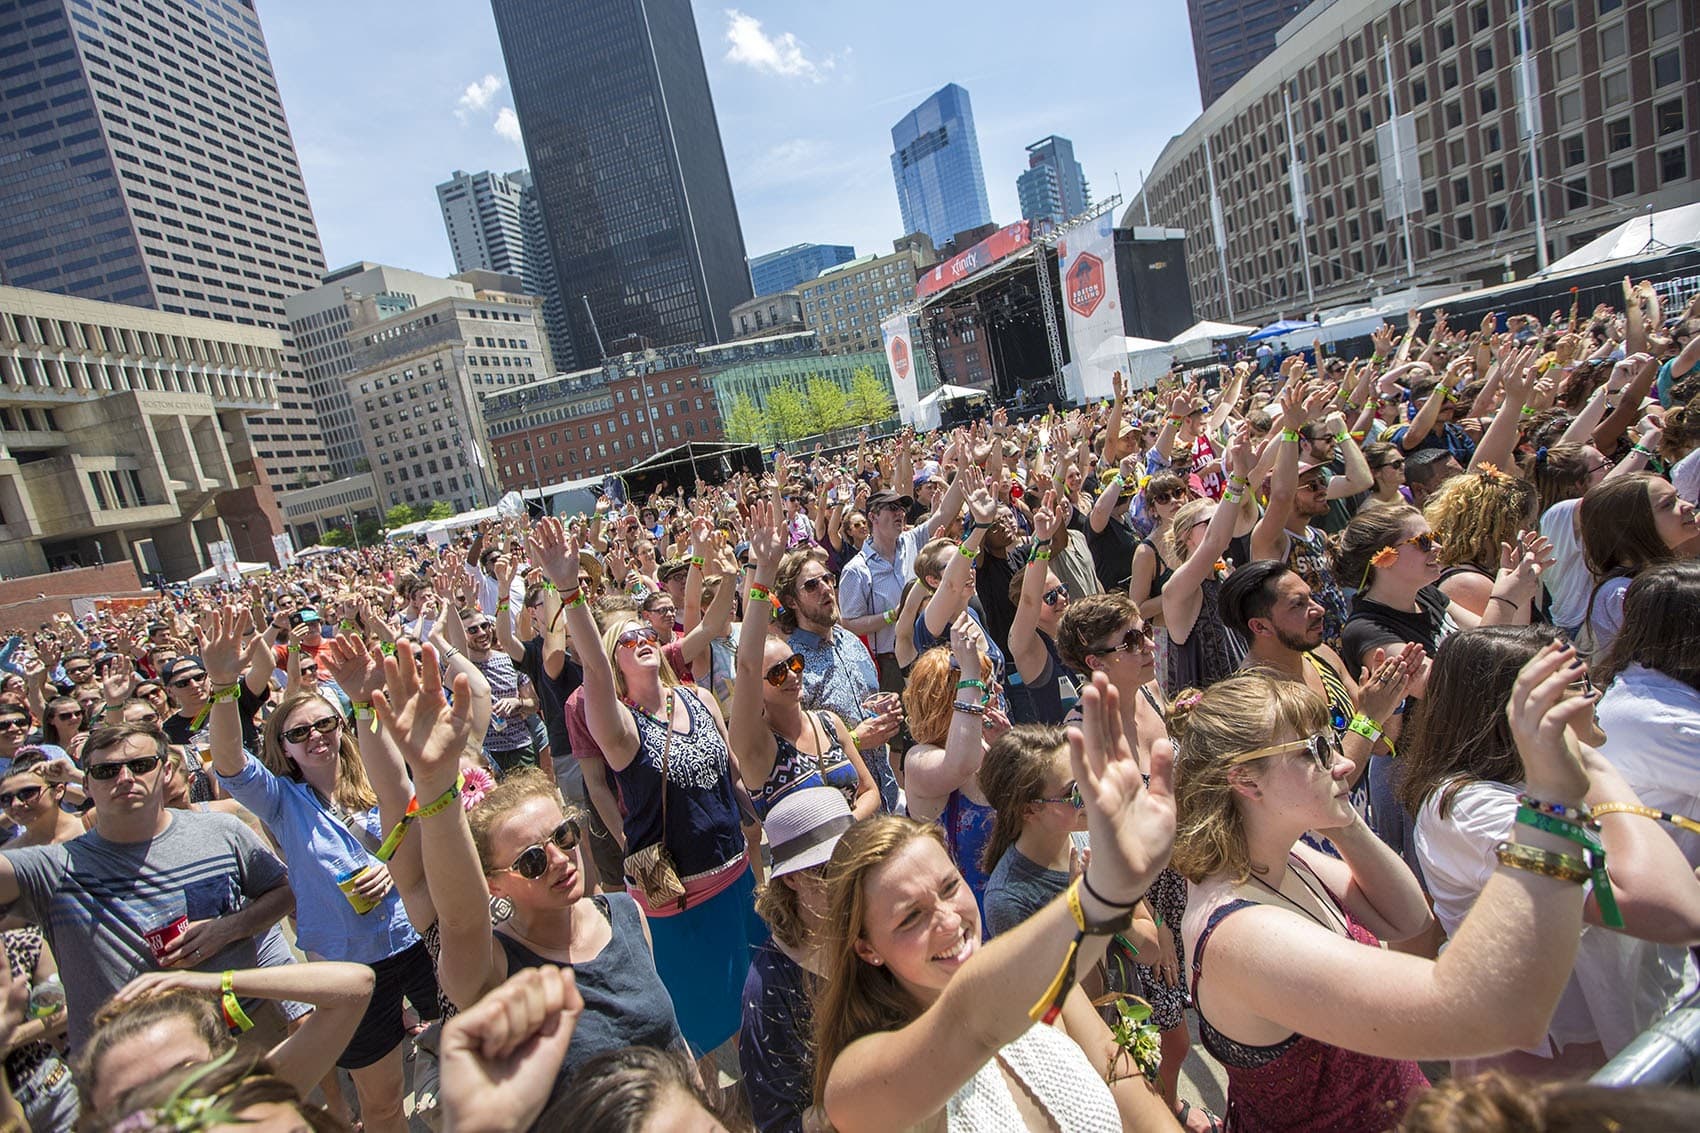 Fans cheer during Saturday afternoon concerts at Boston Calling in City Hall Plaza last May. This year, the festival is moving to greener pastures in Allston. (Jesse Costa/WBUR)